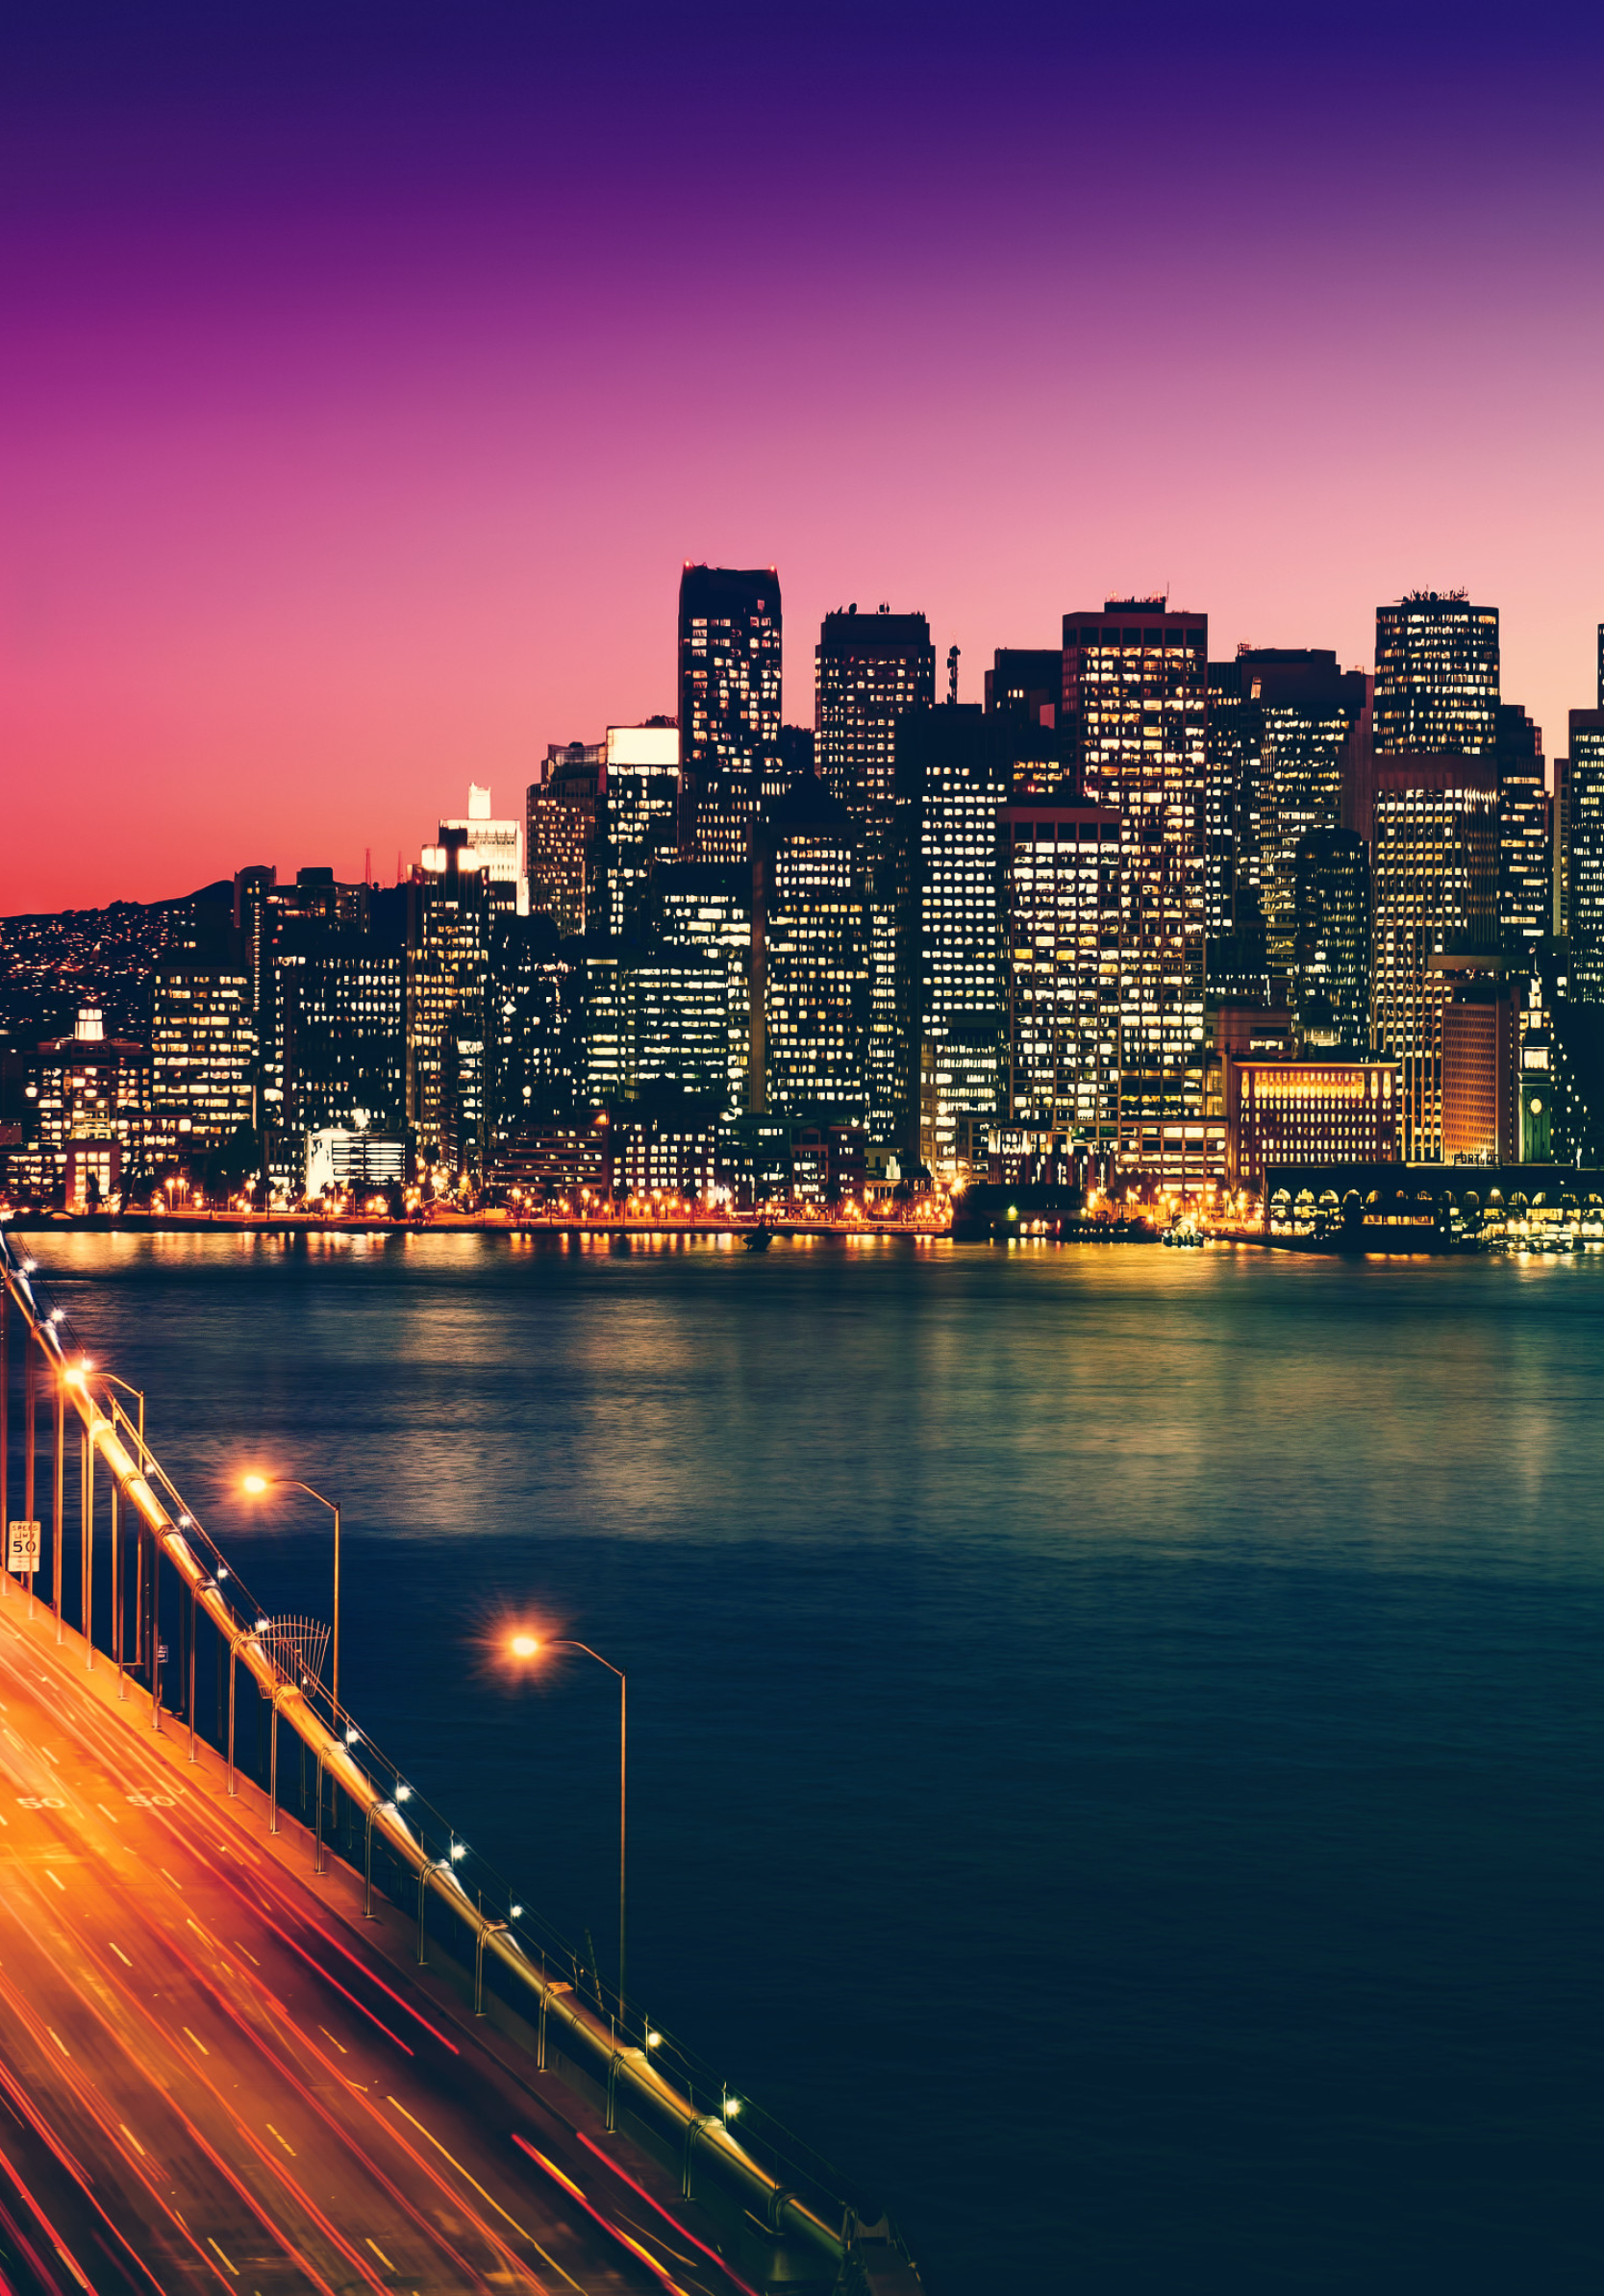 1668x23 Artistic Sunset San Francisco Cityscape 1668x23 Resolution Wallpaper Hd Artist 4k Wallpapers Images Photos And Background Wallpapers Den